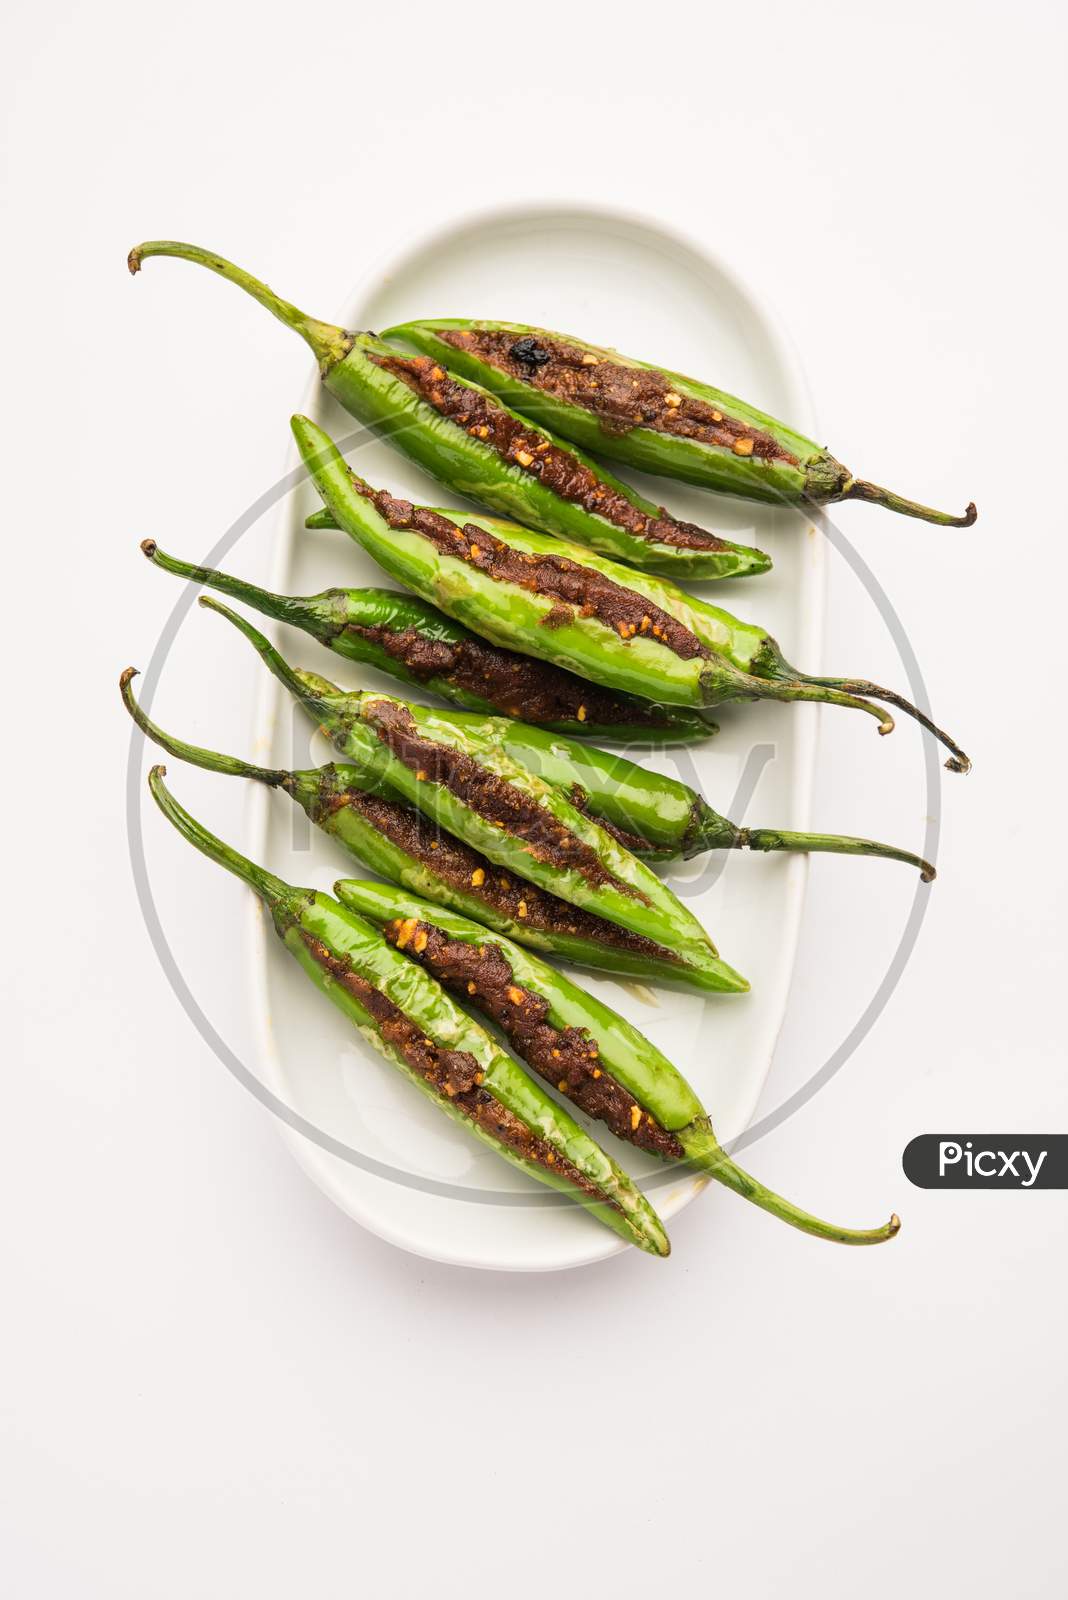 Stuffed Green Chillies Or Bharwa Mirch Using Spices Or Masala